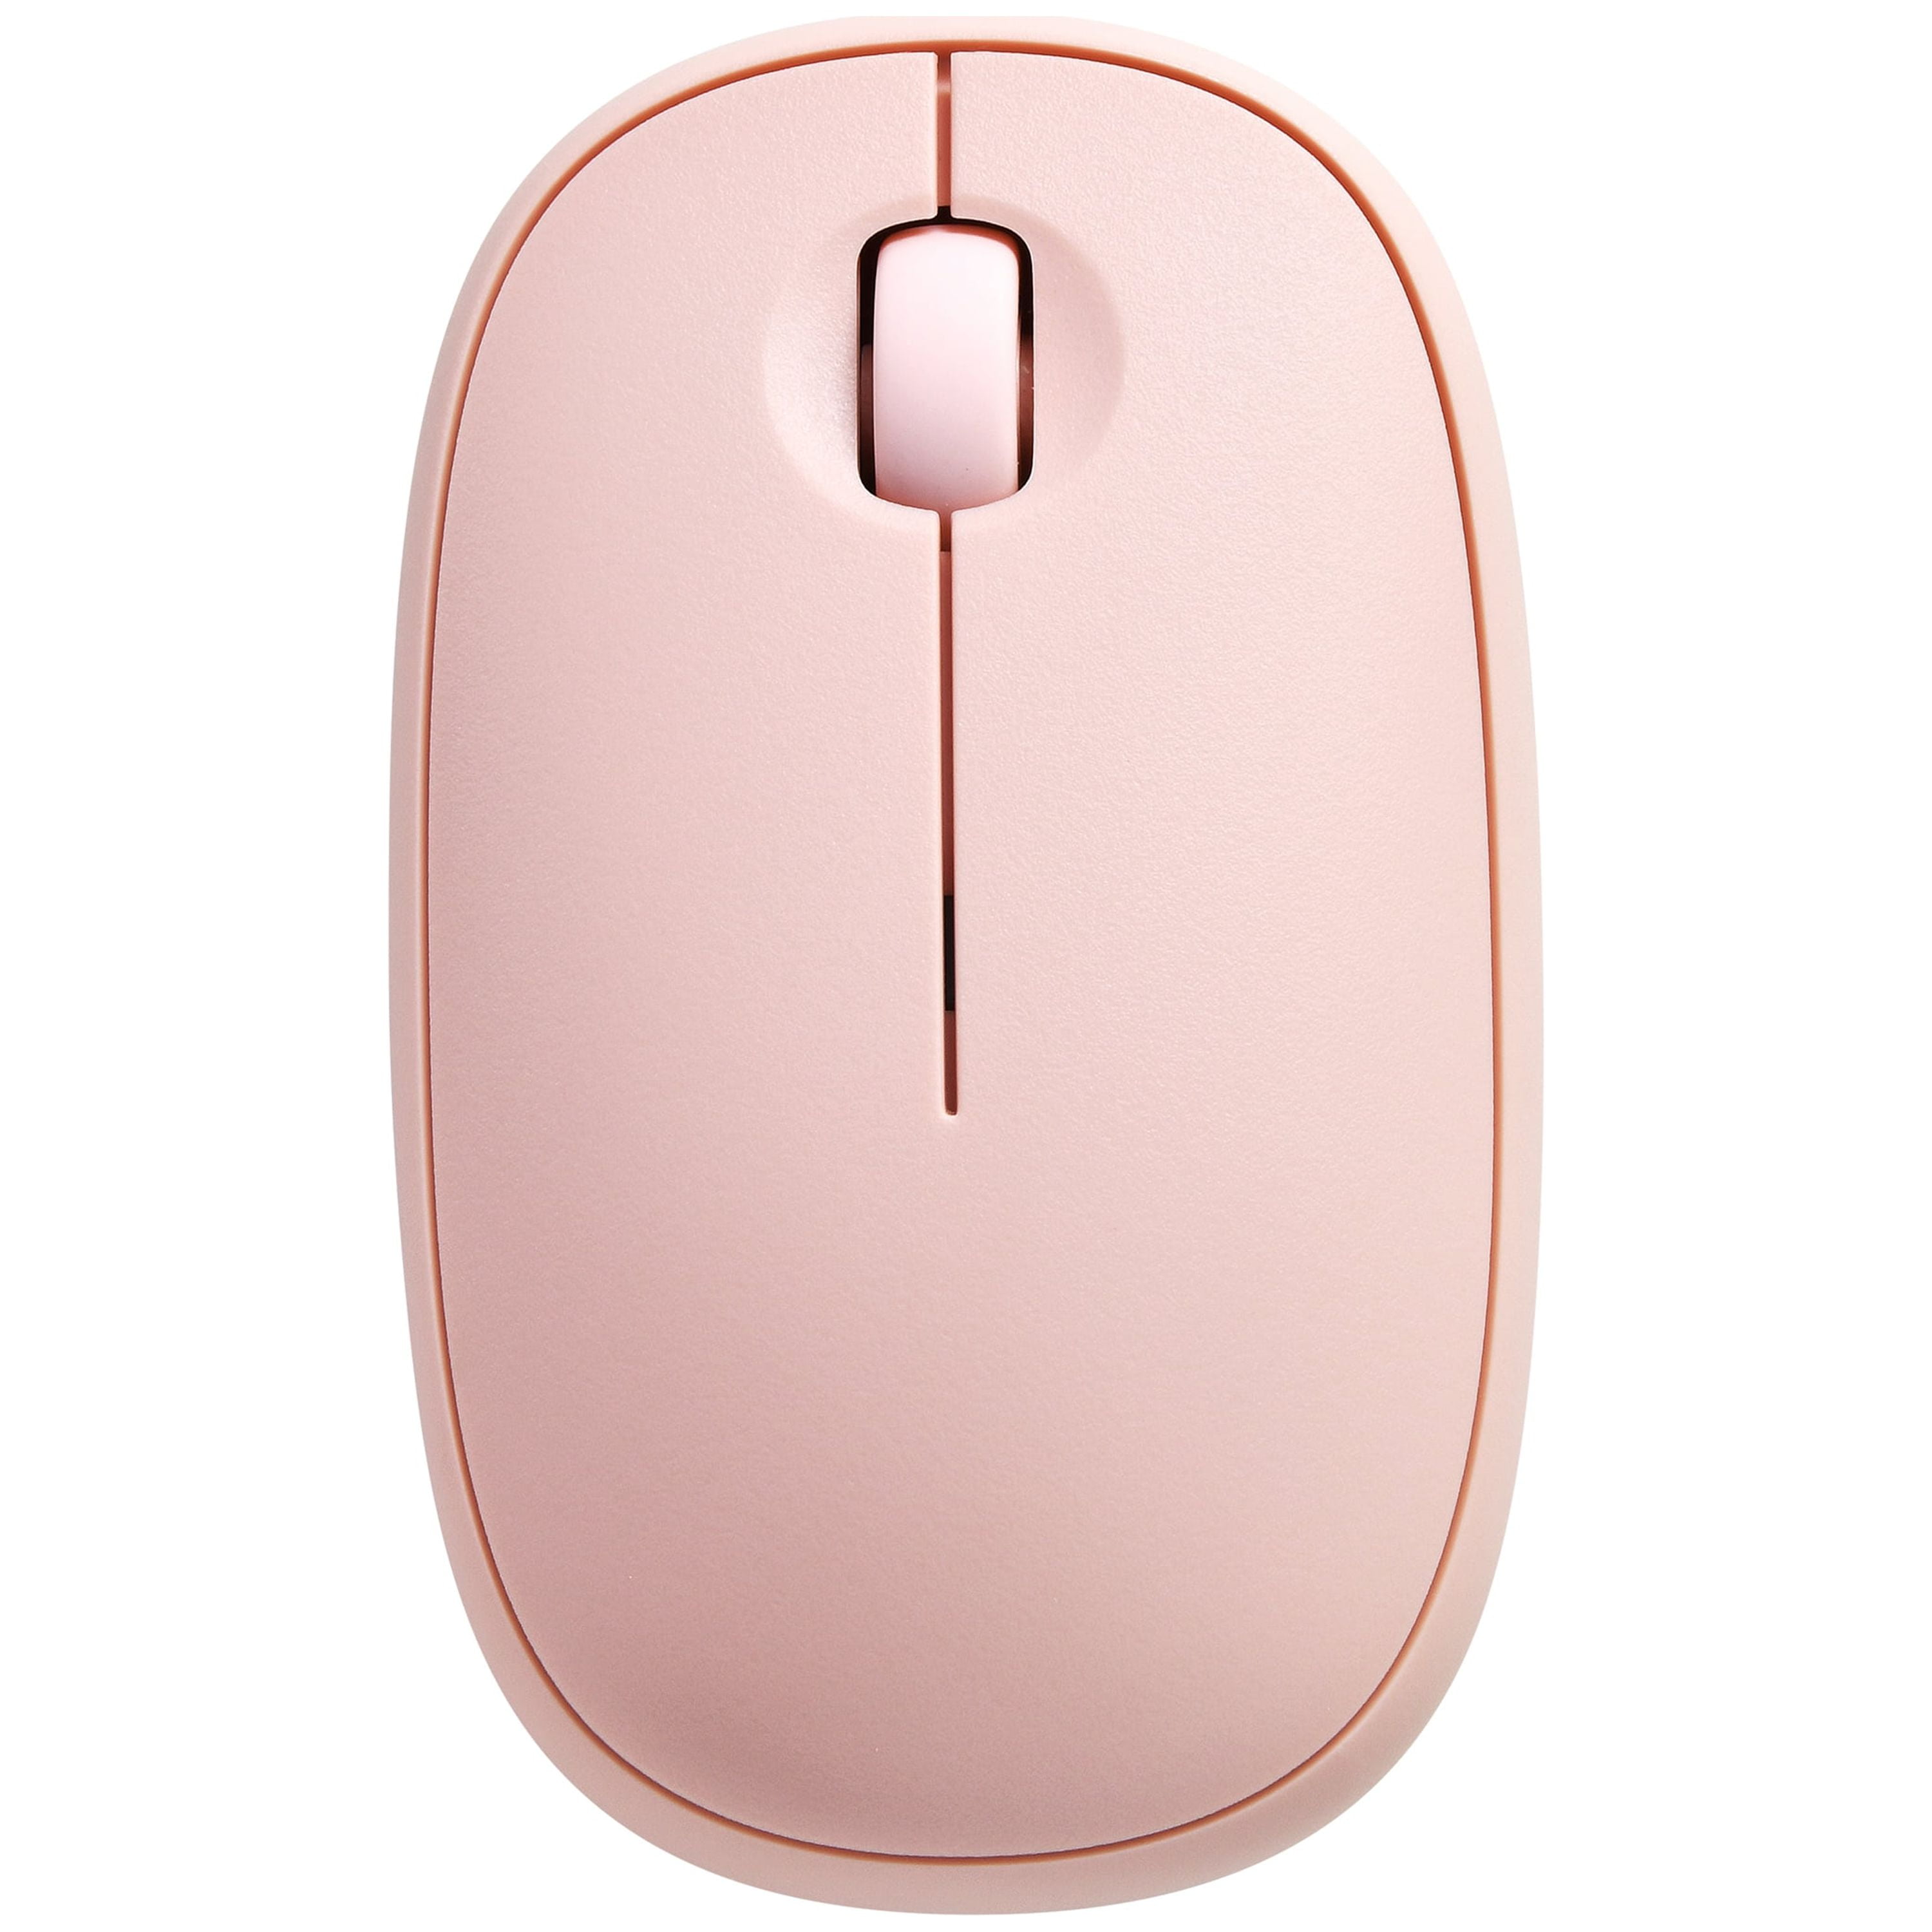  SOON GO Pink Mouse for Laptop Computer Mice with